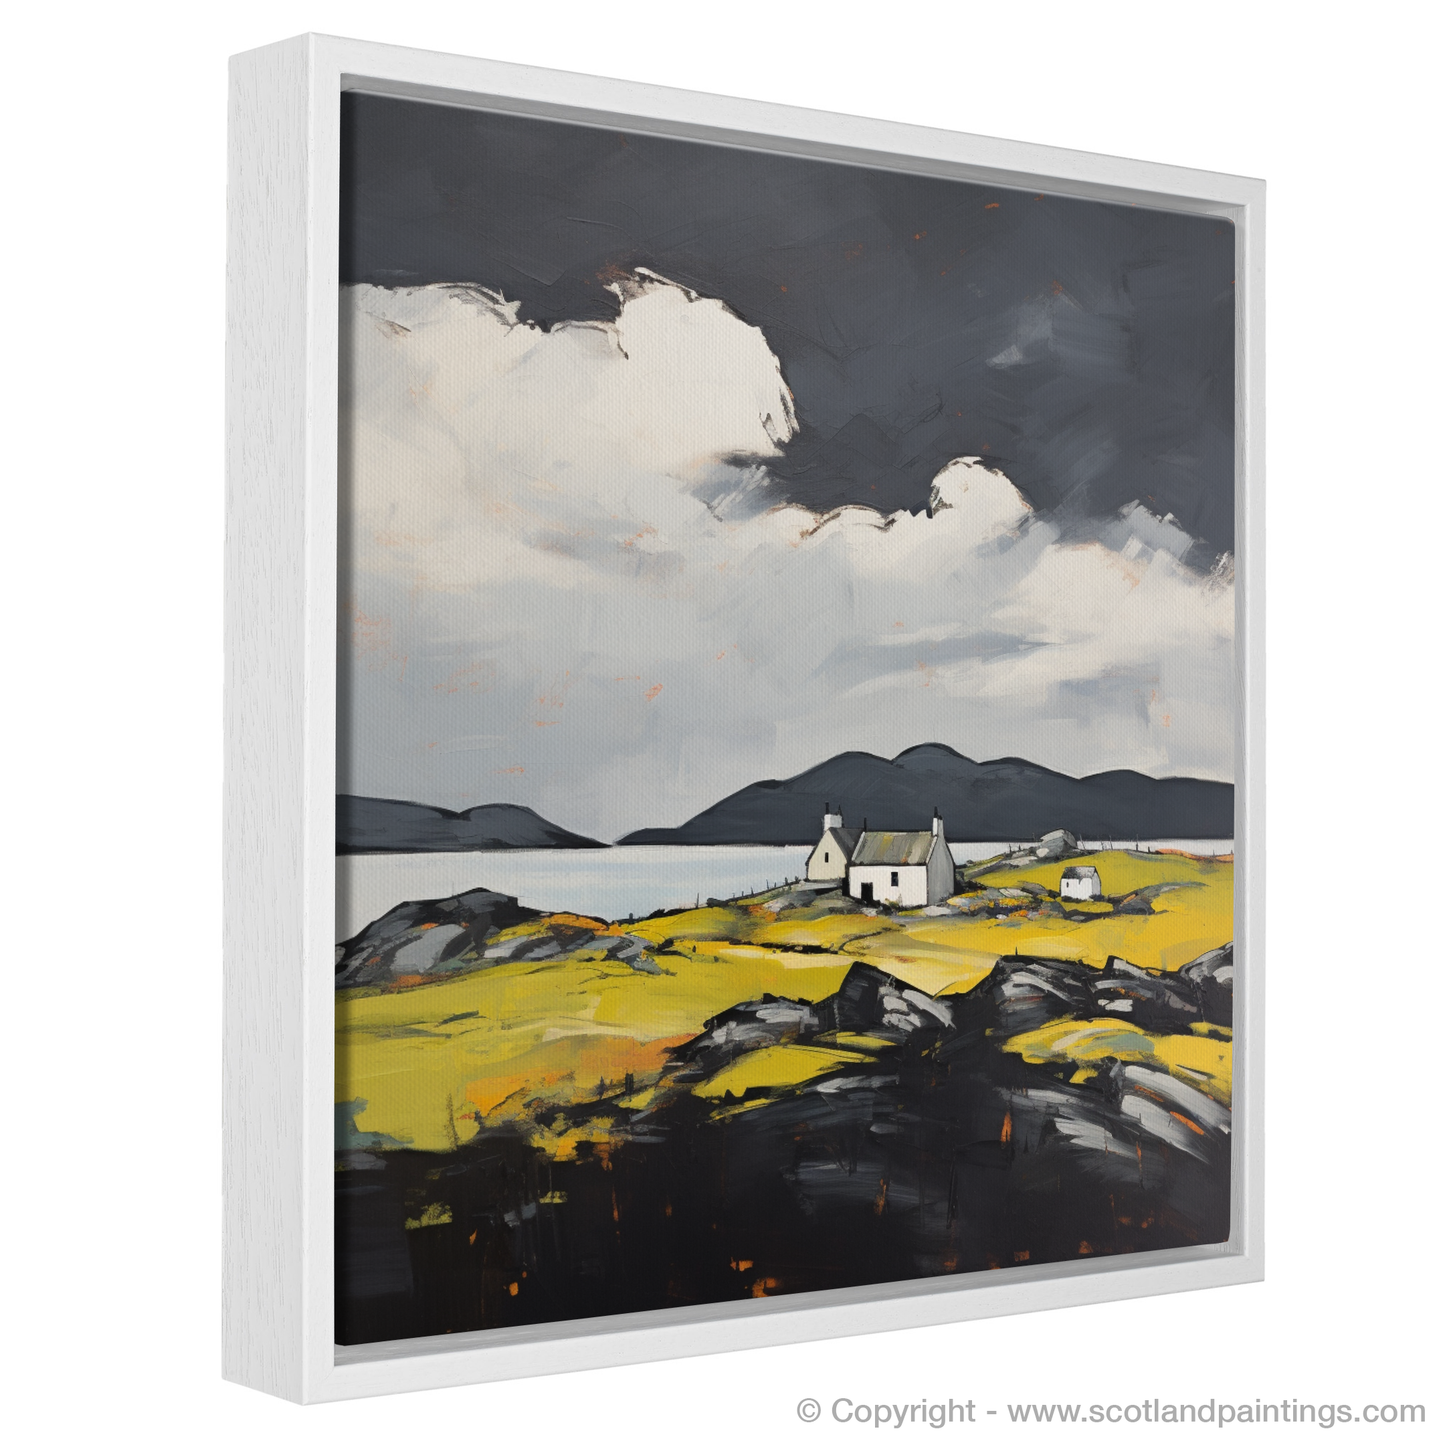 Painting and Art Print of Isle of Barra, Outer Hebrides entitled "Expressionism of Barra: A Rugged Charm Revealed".